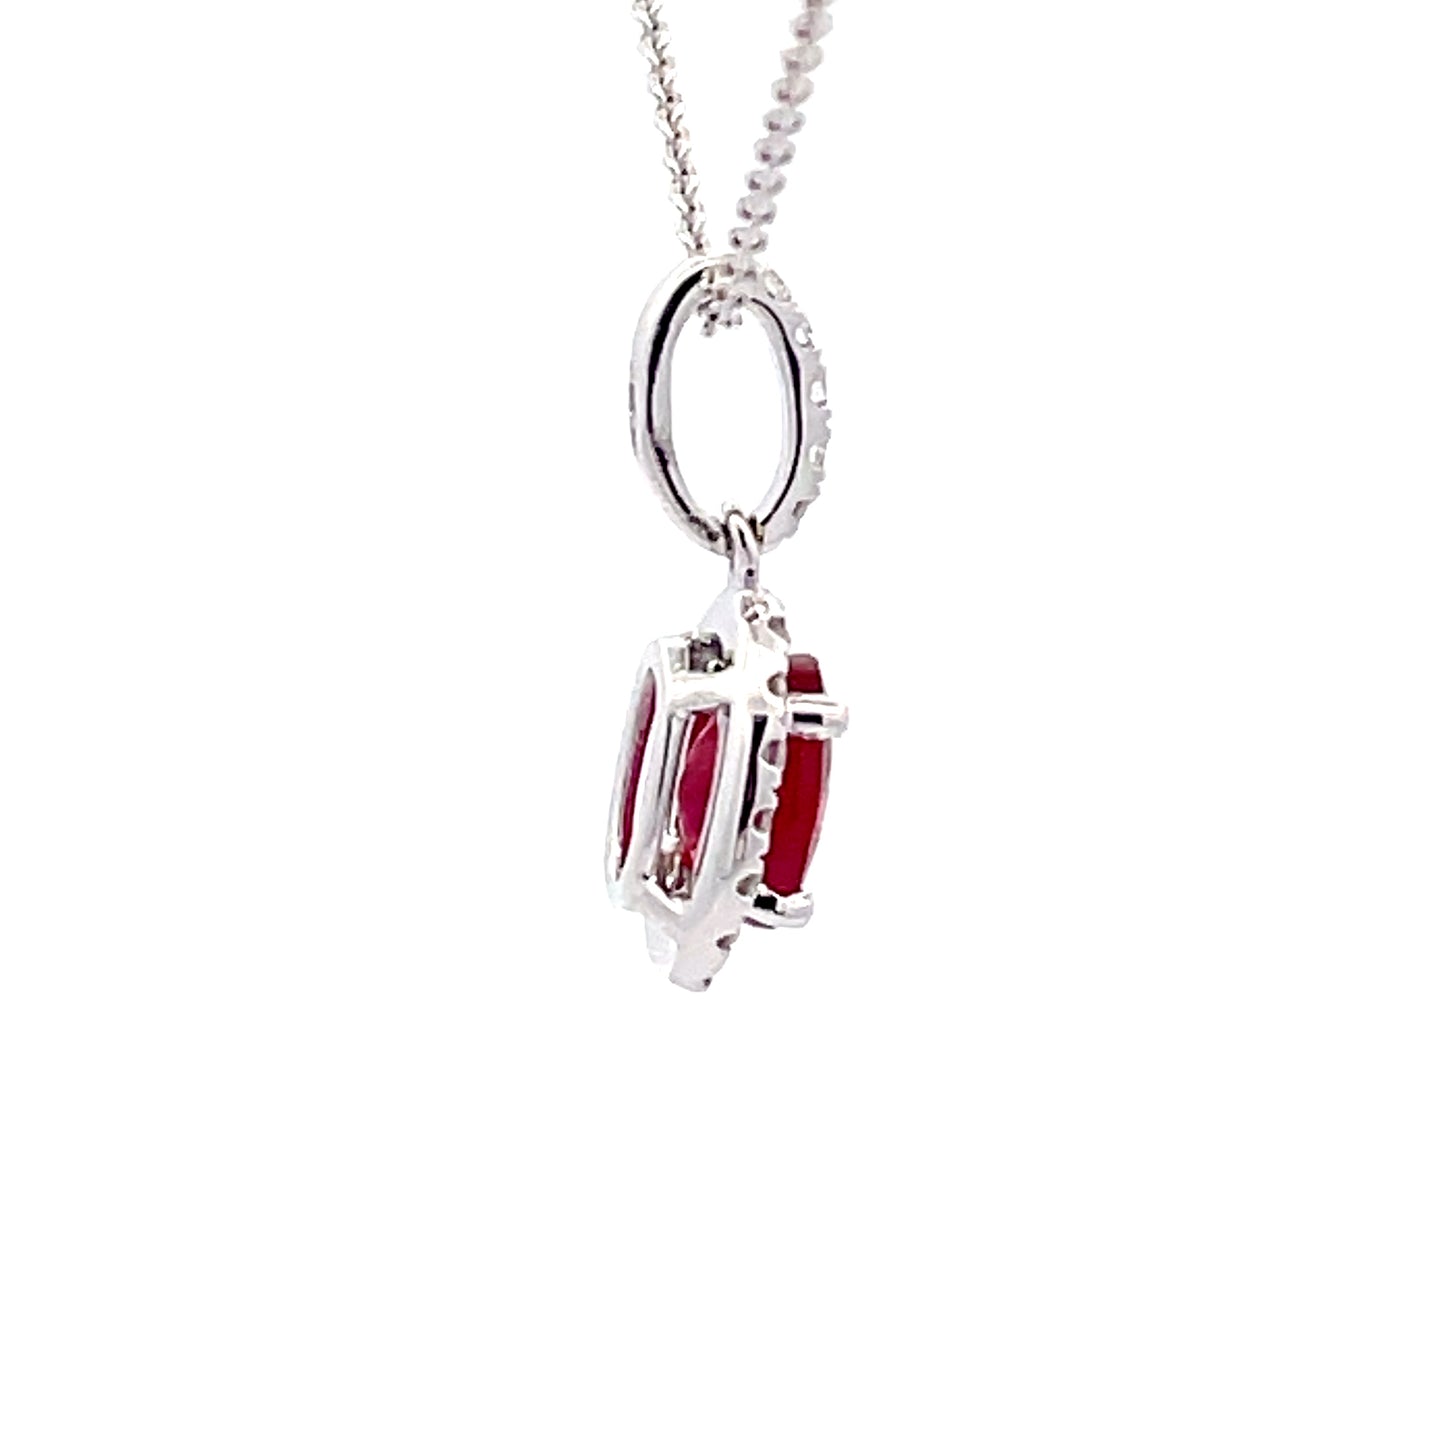 Ruby and Diamond Halo Style Pendant  Gardiner Brothers   